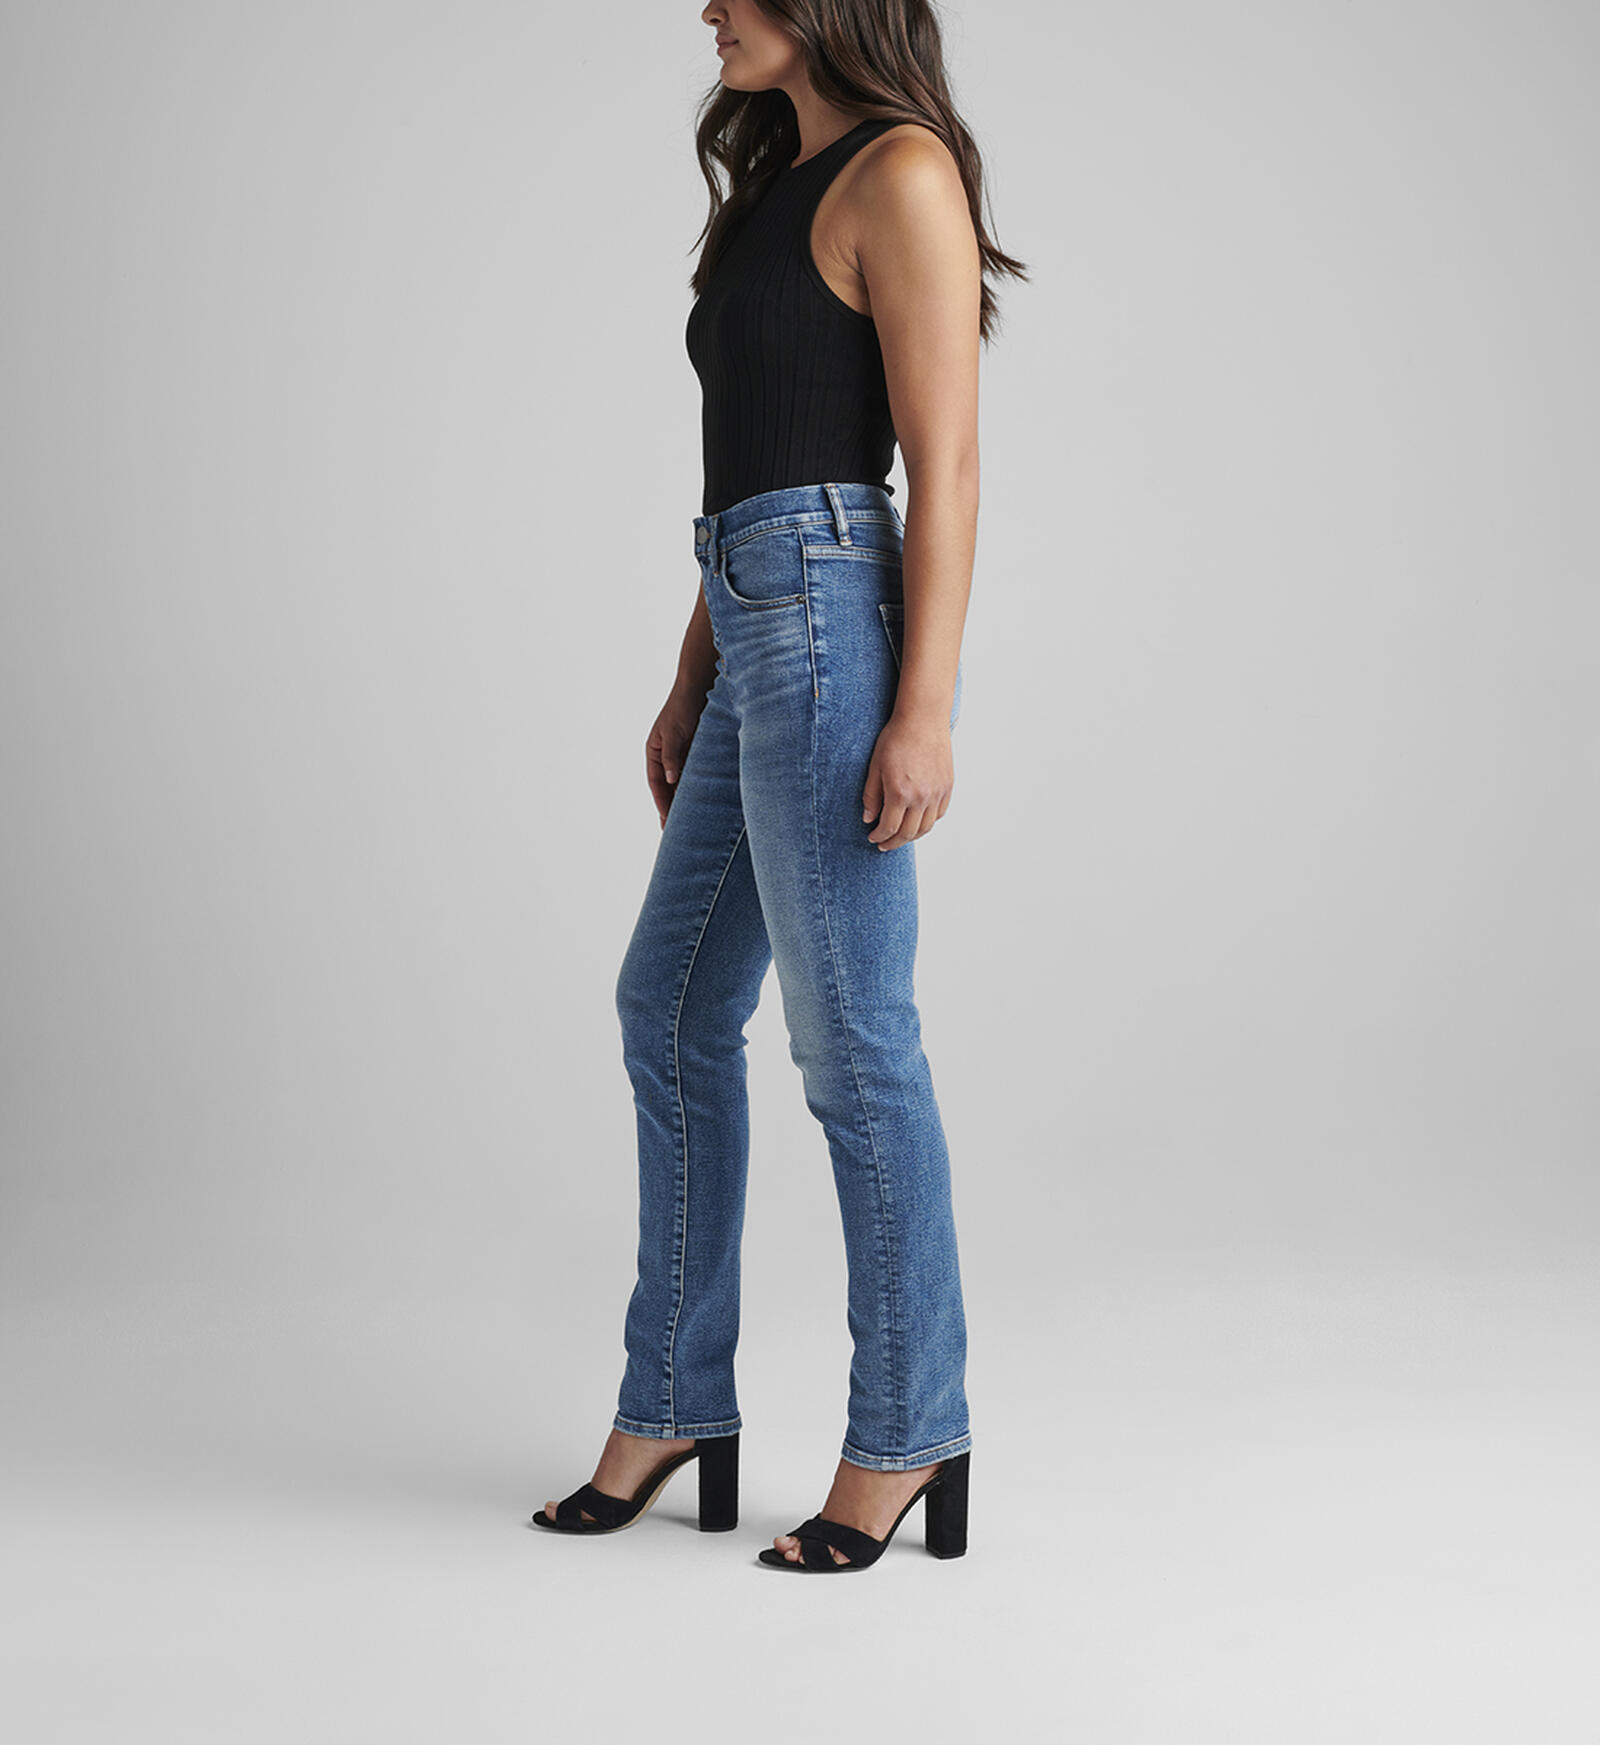 Buy Valentina High Rise Straight Leg Pull-On Jeans for CAD 37.00